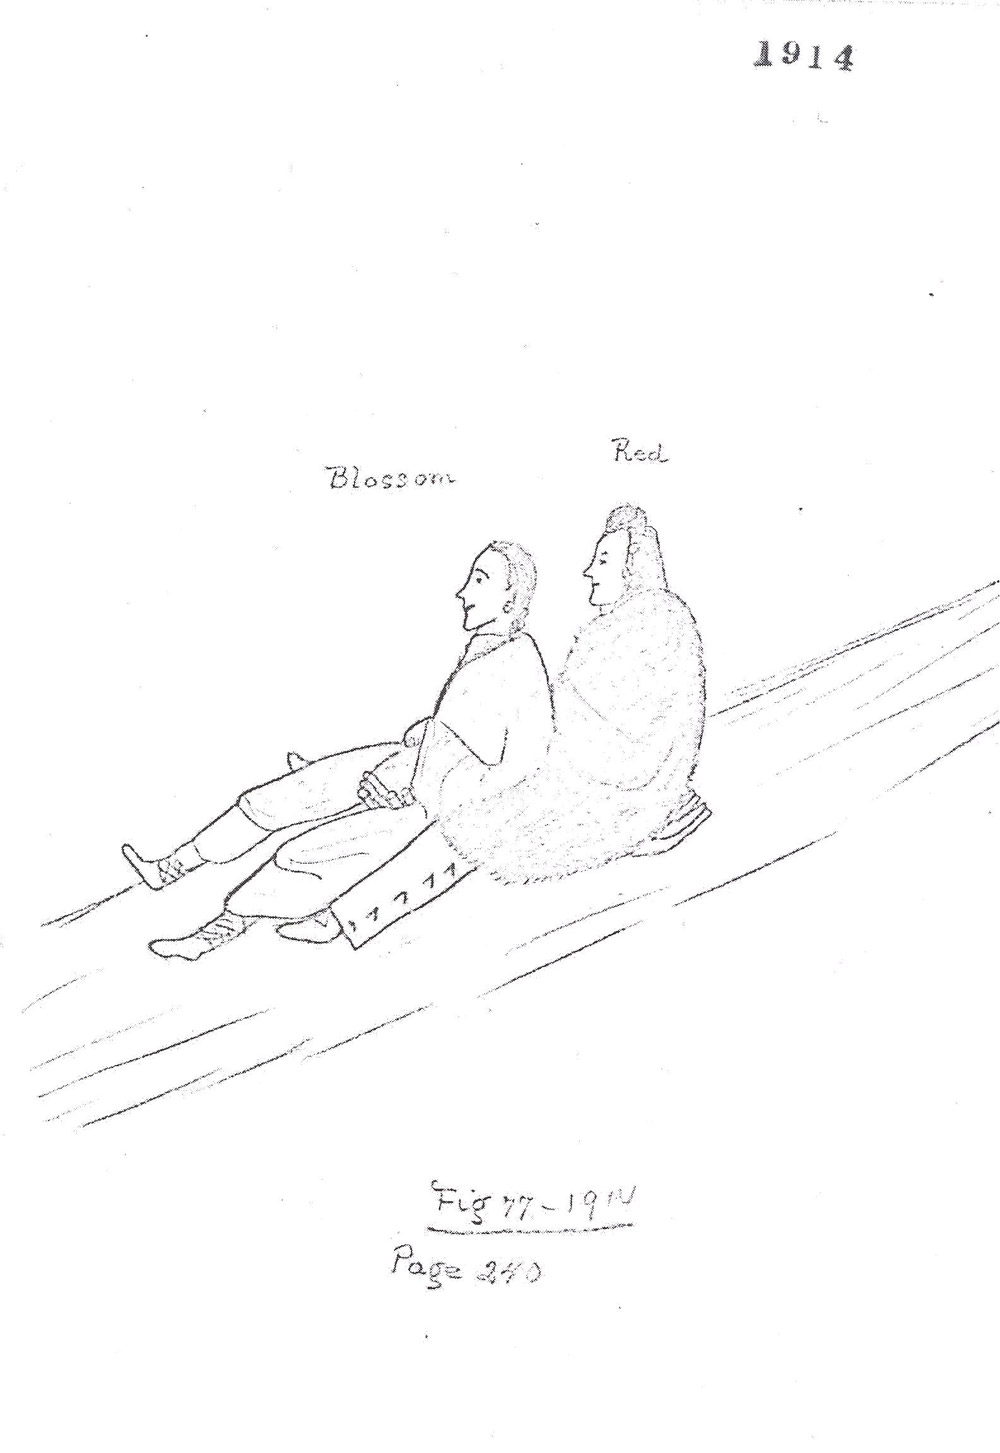 Gilbert Wilson asked Goodbird and Wolf Chief to draw pictures of the stories they told. These two images show how a sled was made from bison ribs joined by rawhide thongs. One or two children could sit on the sled and slide down a snowy hill.